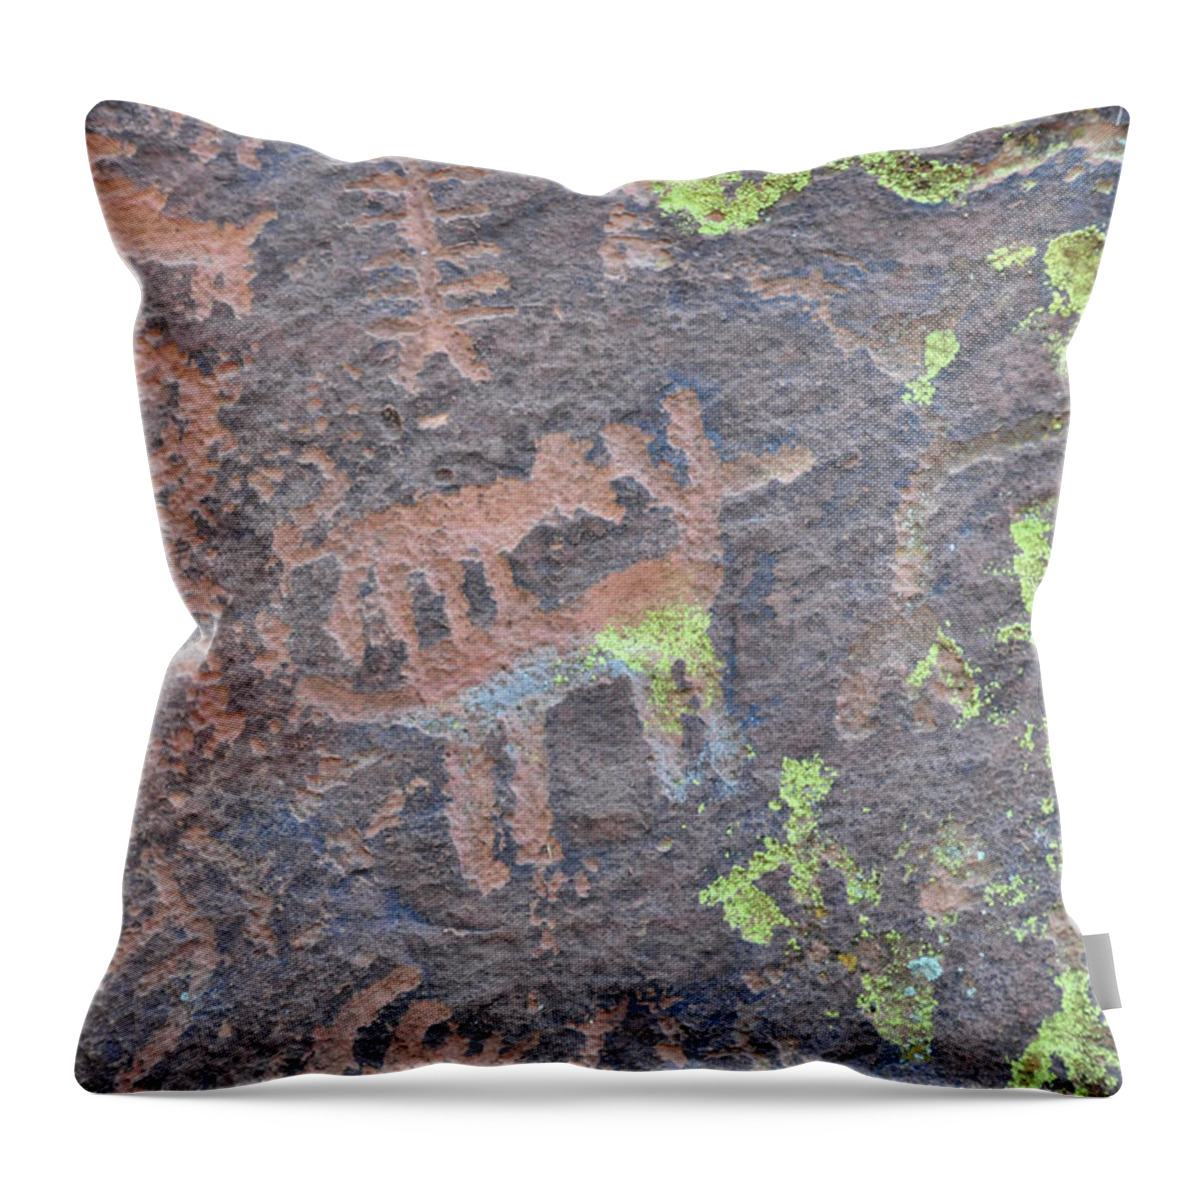 Petroglyph Throw Pillow featuring the photograph Petroglyph Wolf Attack by David Arment